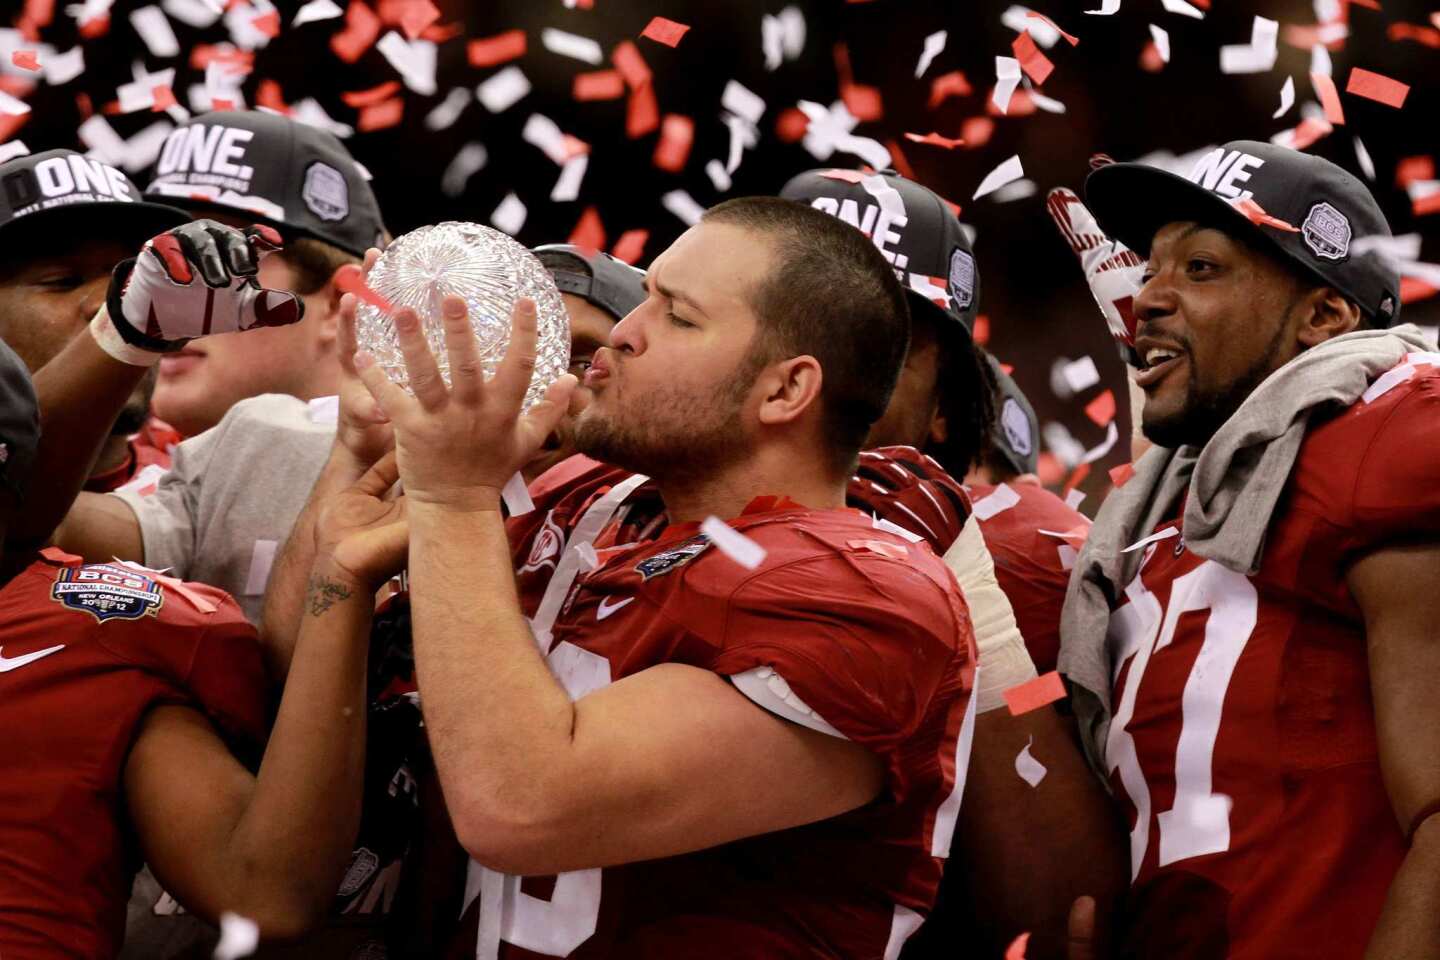 Alabama defensive lineman Nick Gentry gives the BCS trophy a kiss after helping the Crimson Tide shut down LSU, 21-0, in the championship game on Monday night at the Superdome in New Orleans.